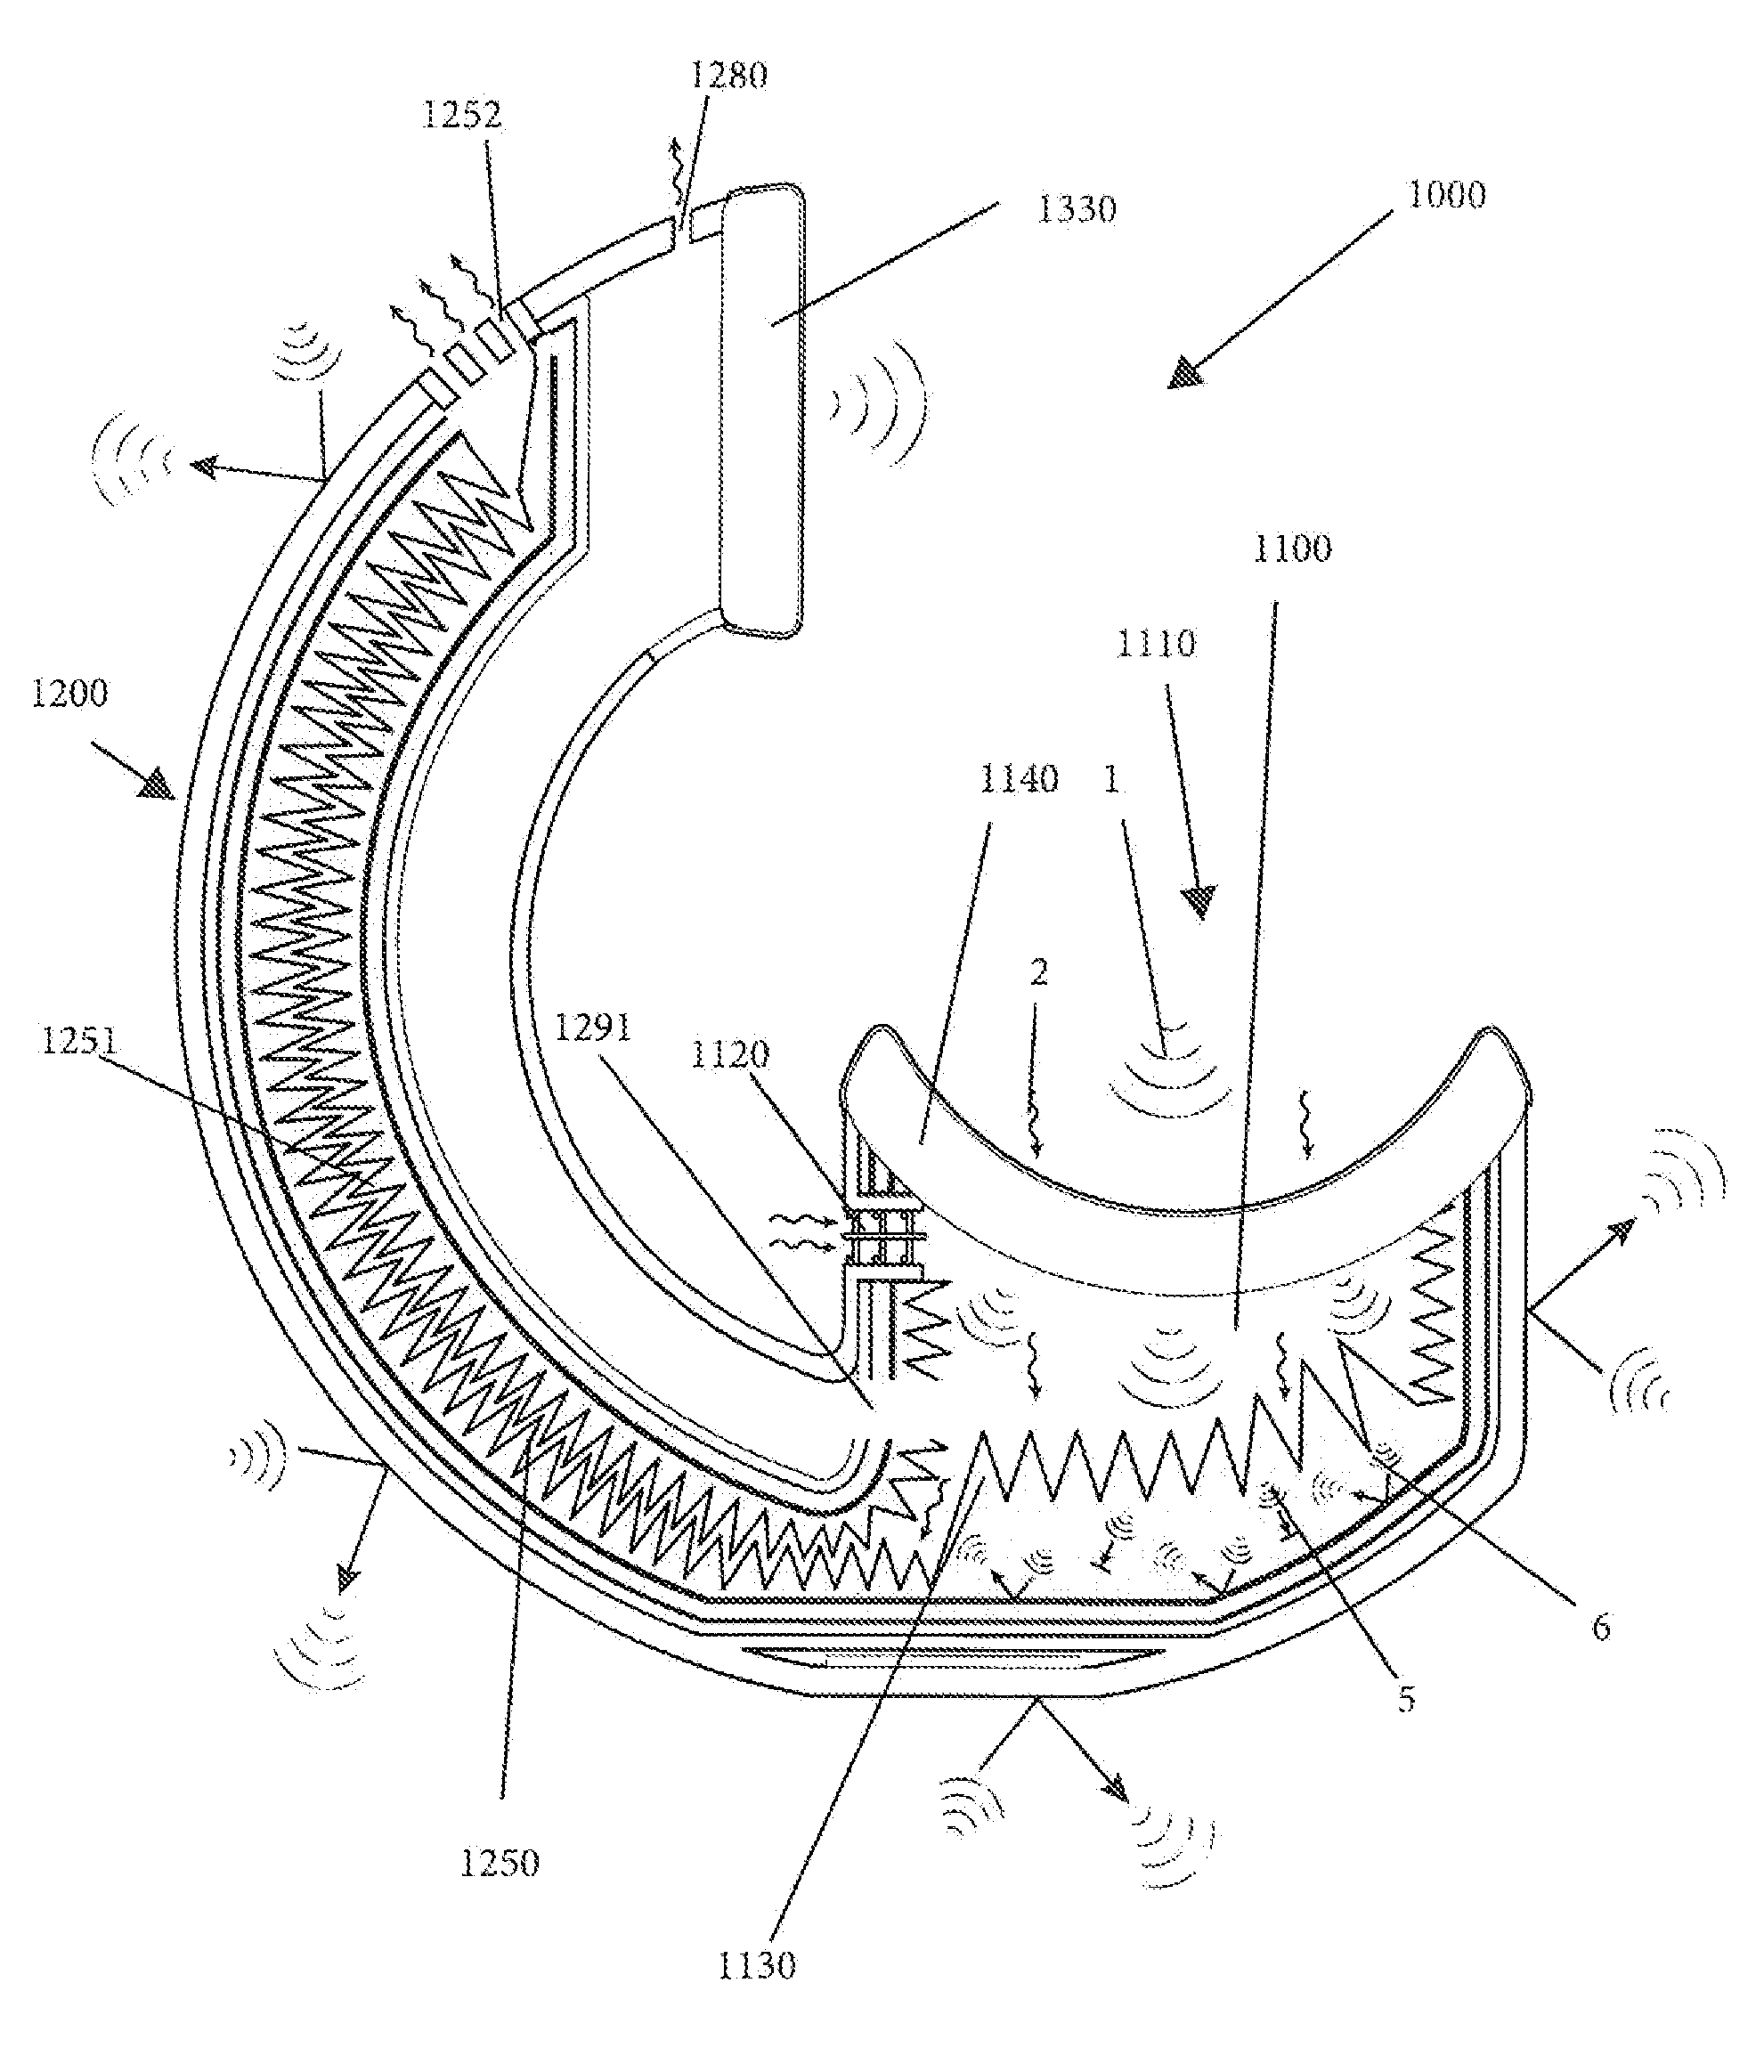 Ergonomic tubular anechoic chambers for use with a communication device and related methods